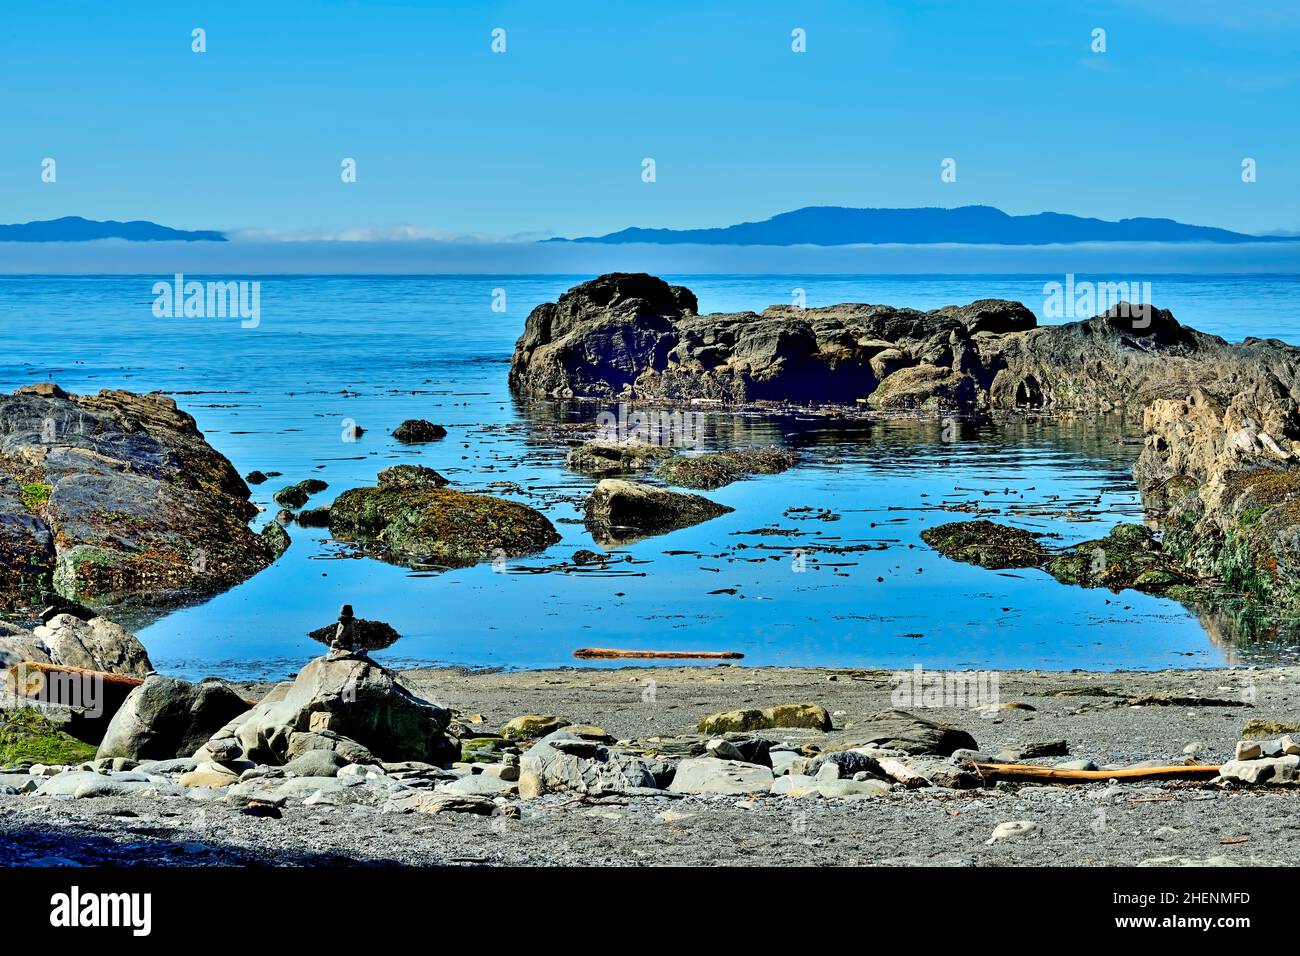 A landscape image of a rocky beach on the rugged west coast of Vancouver Island looking toward the Pacific Ocean. Stock Photo